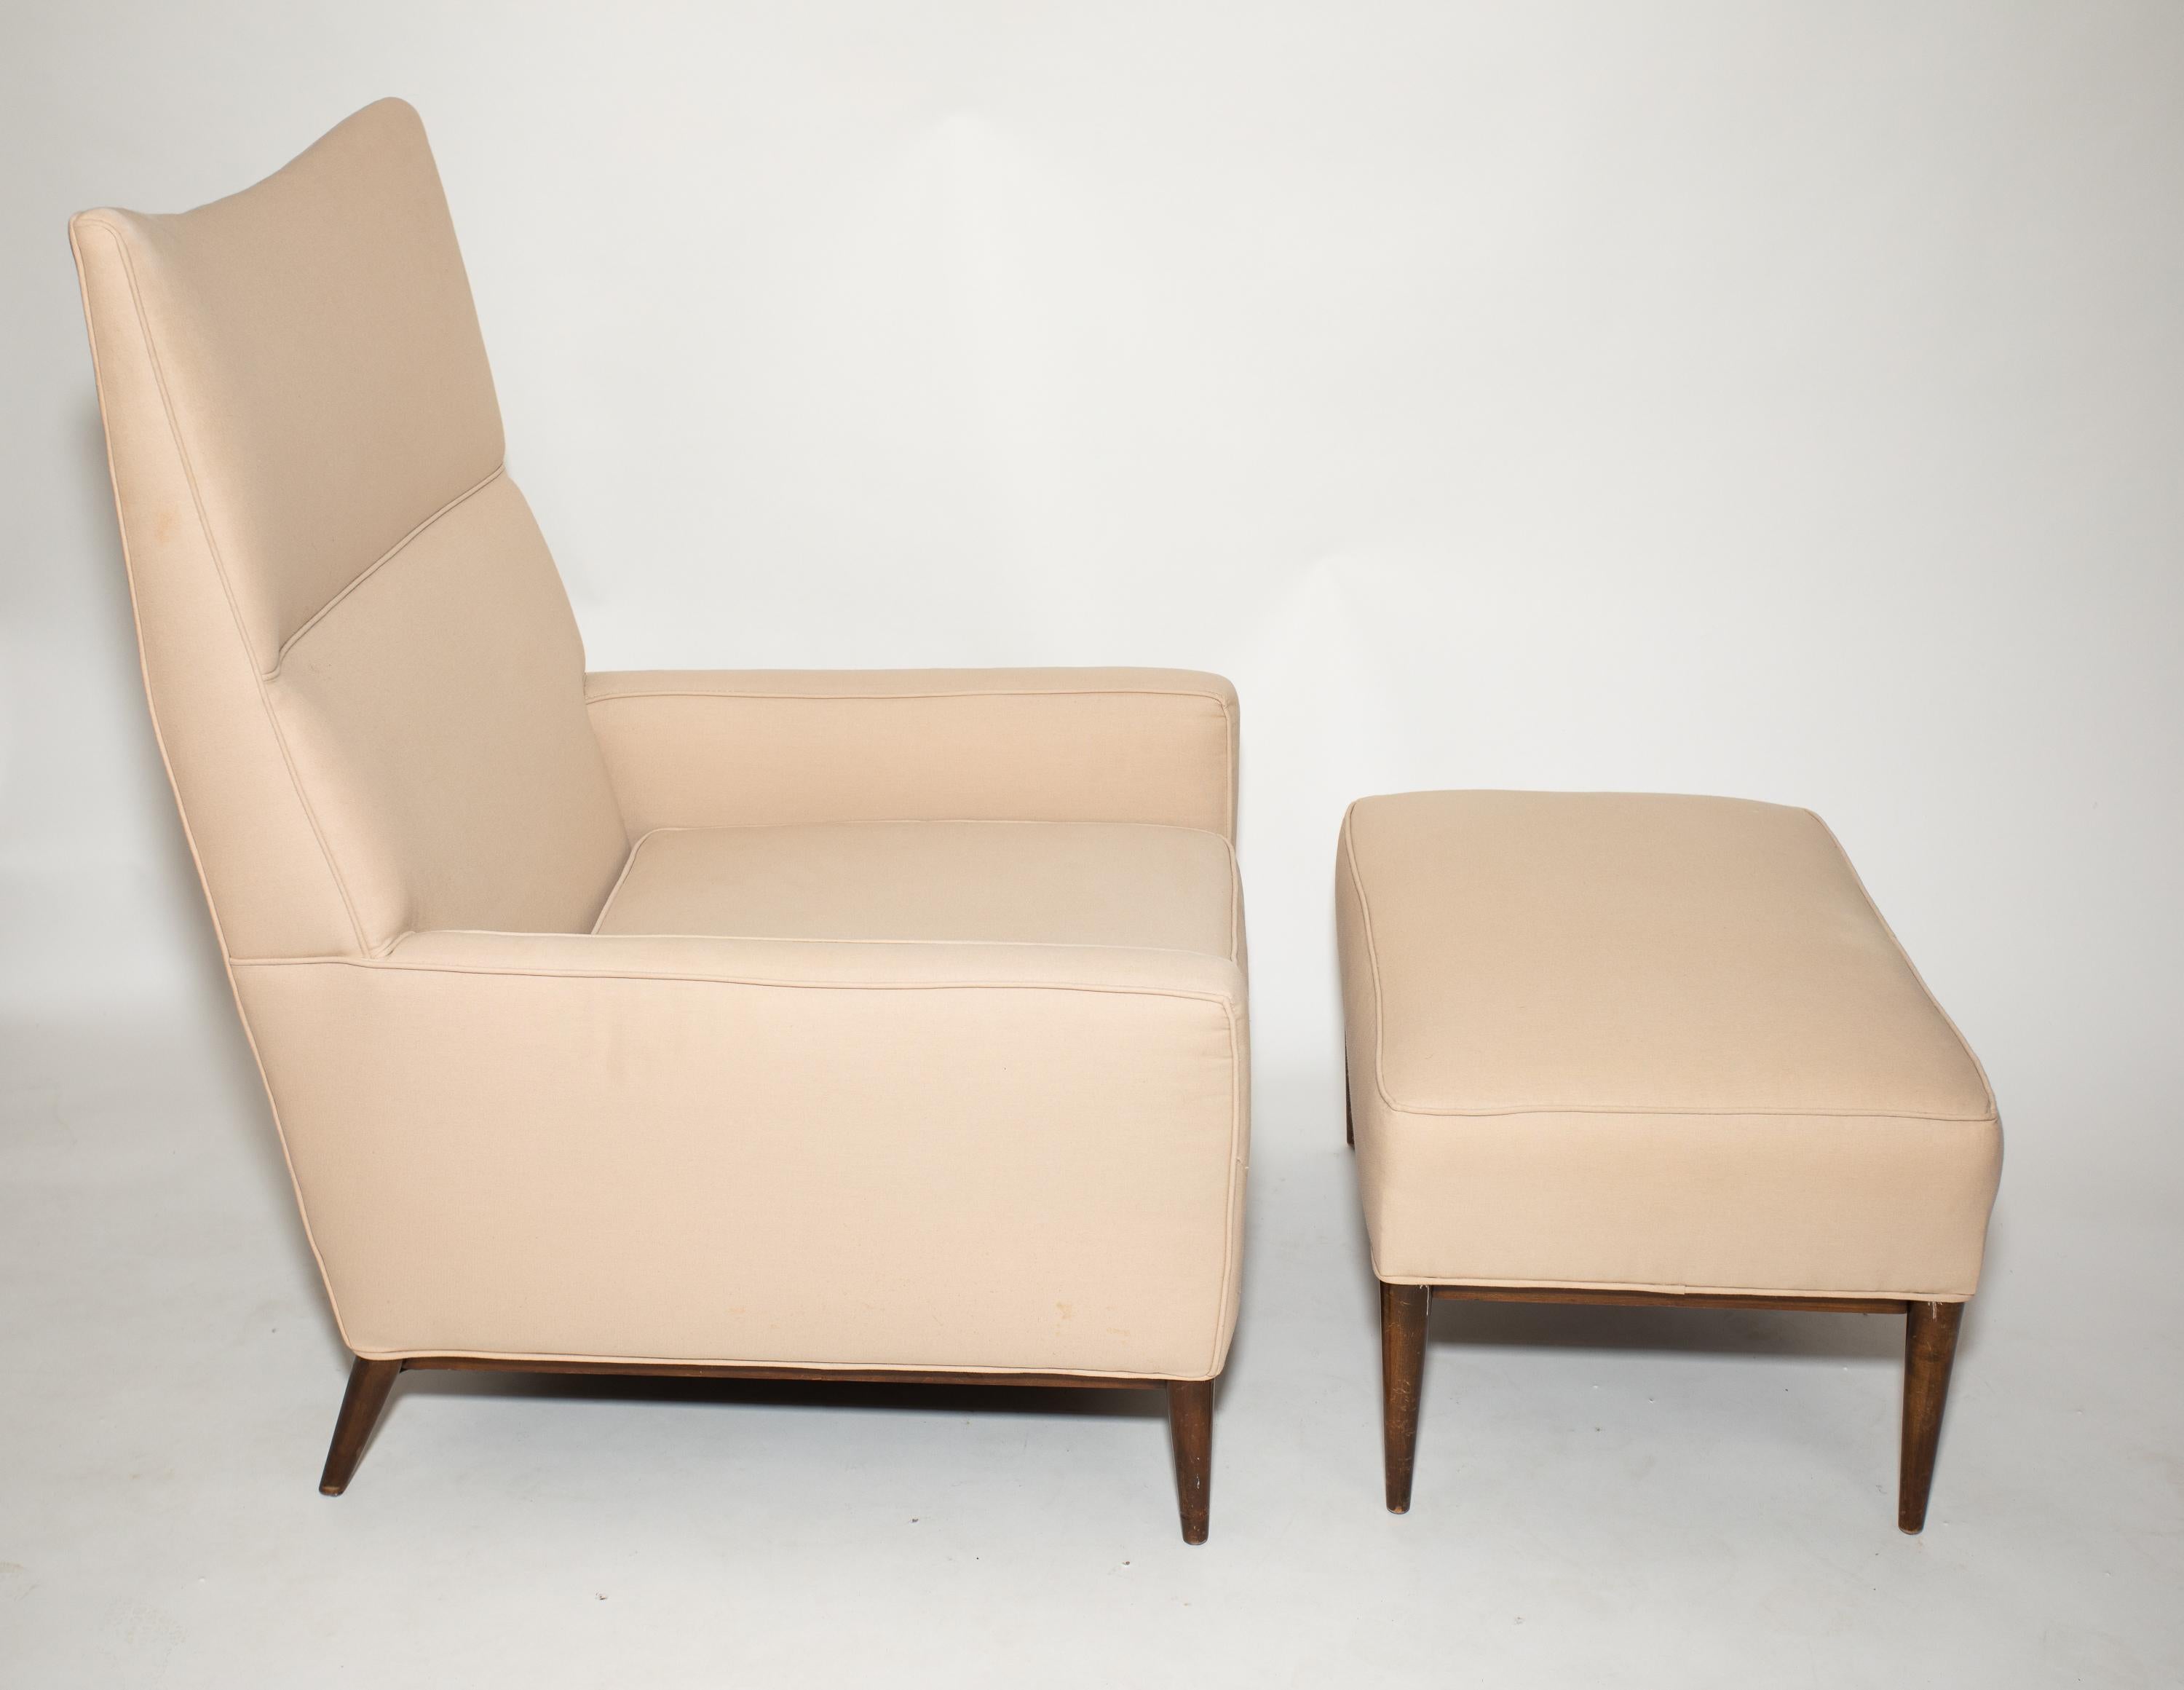 Paul Mccobb oversized lounge chair and ottoman #314
Sold and listed in the 1955 Directional Furniture Catalog.
Walnut legs, recently re-upholstered.
The chair and ottoman are monumental in size.
Ottoman 30